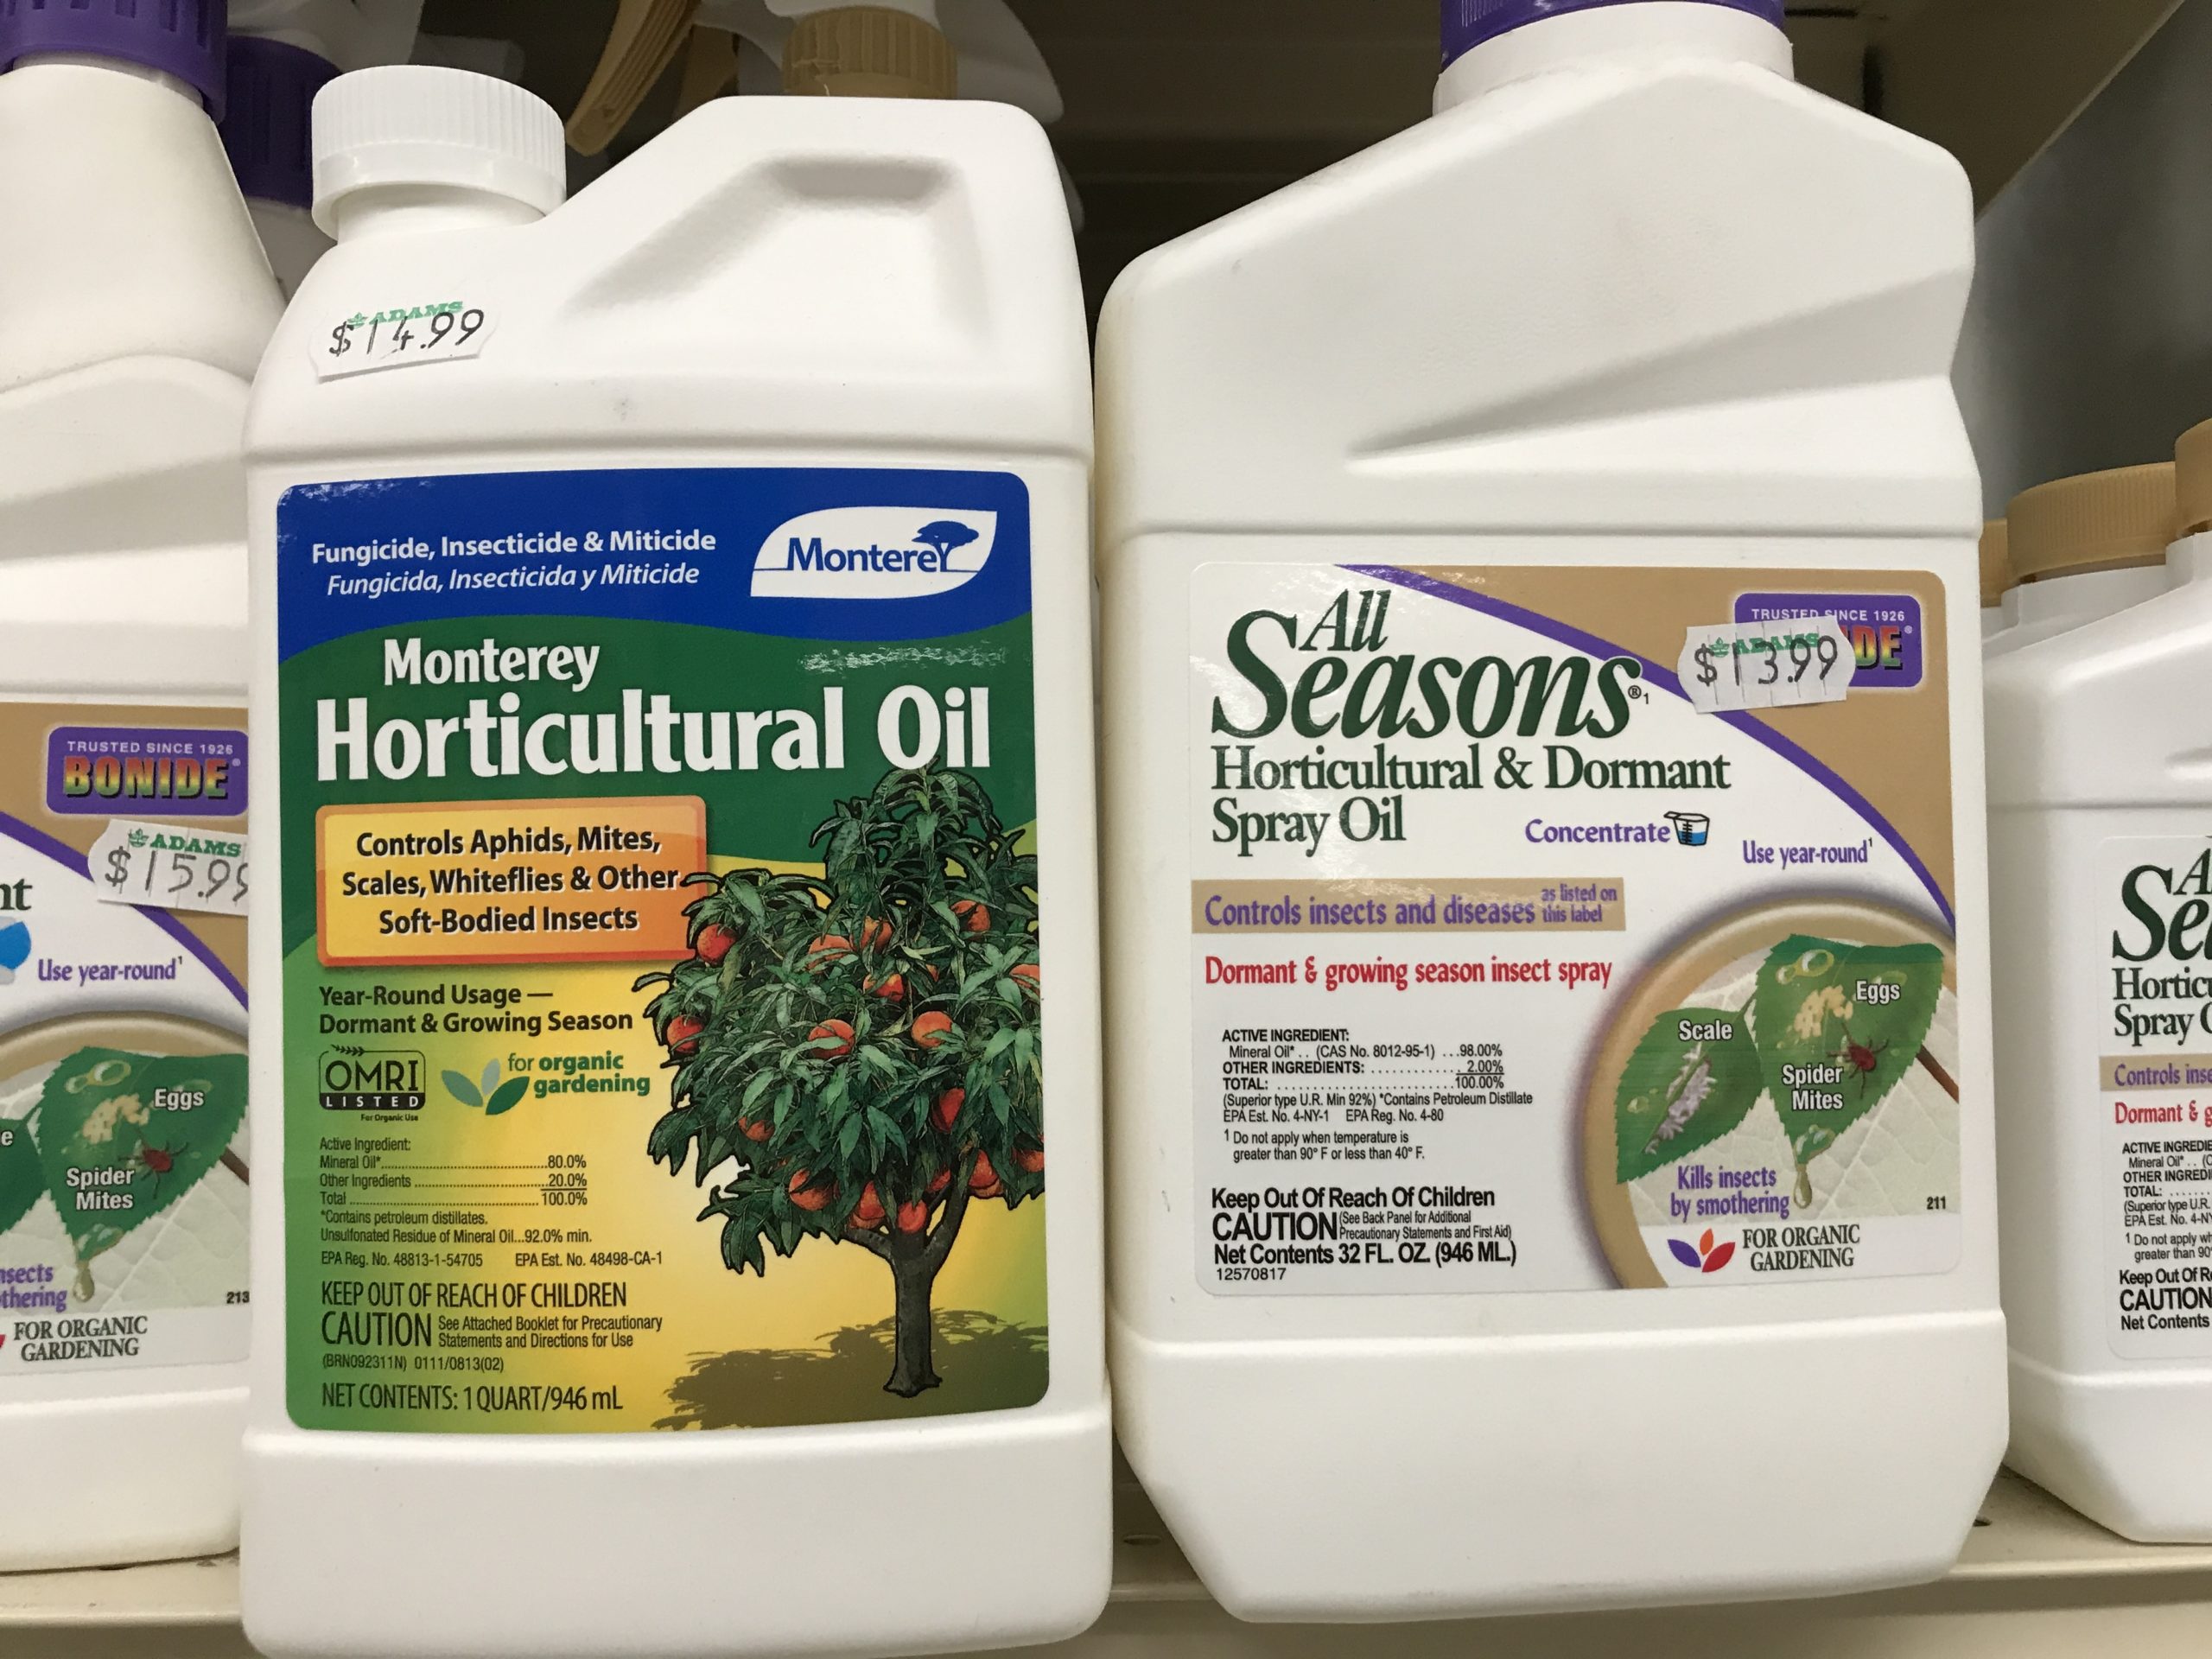 Not all dormant oils are the same. The Monterey (left) has 80 percent mineral oil while the All Seasons on the right is 98 percent mineral oil.  Some of these oils (like these two) can be used throughout the season, but others are only for “dormant” use.  Read the label.